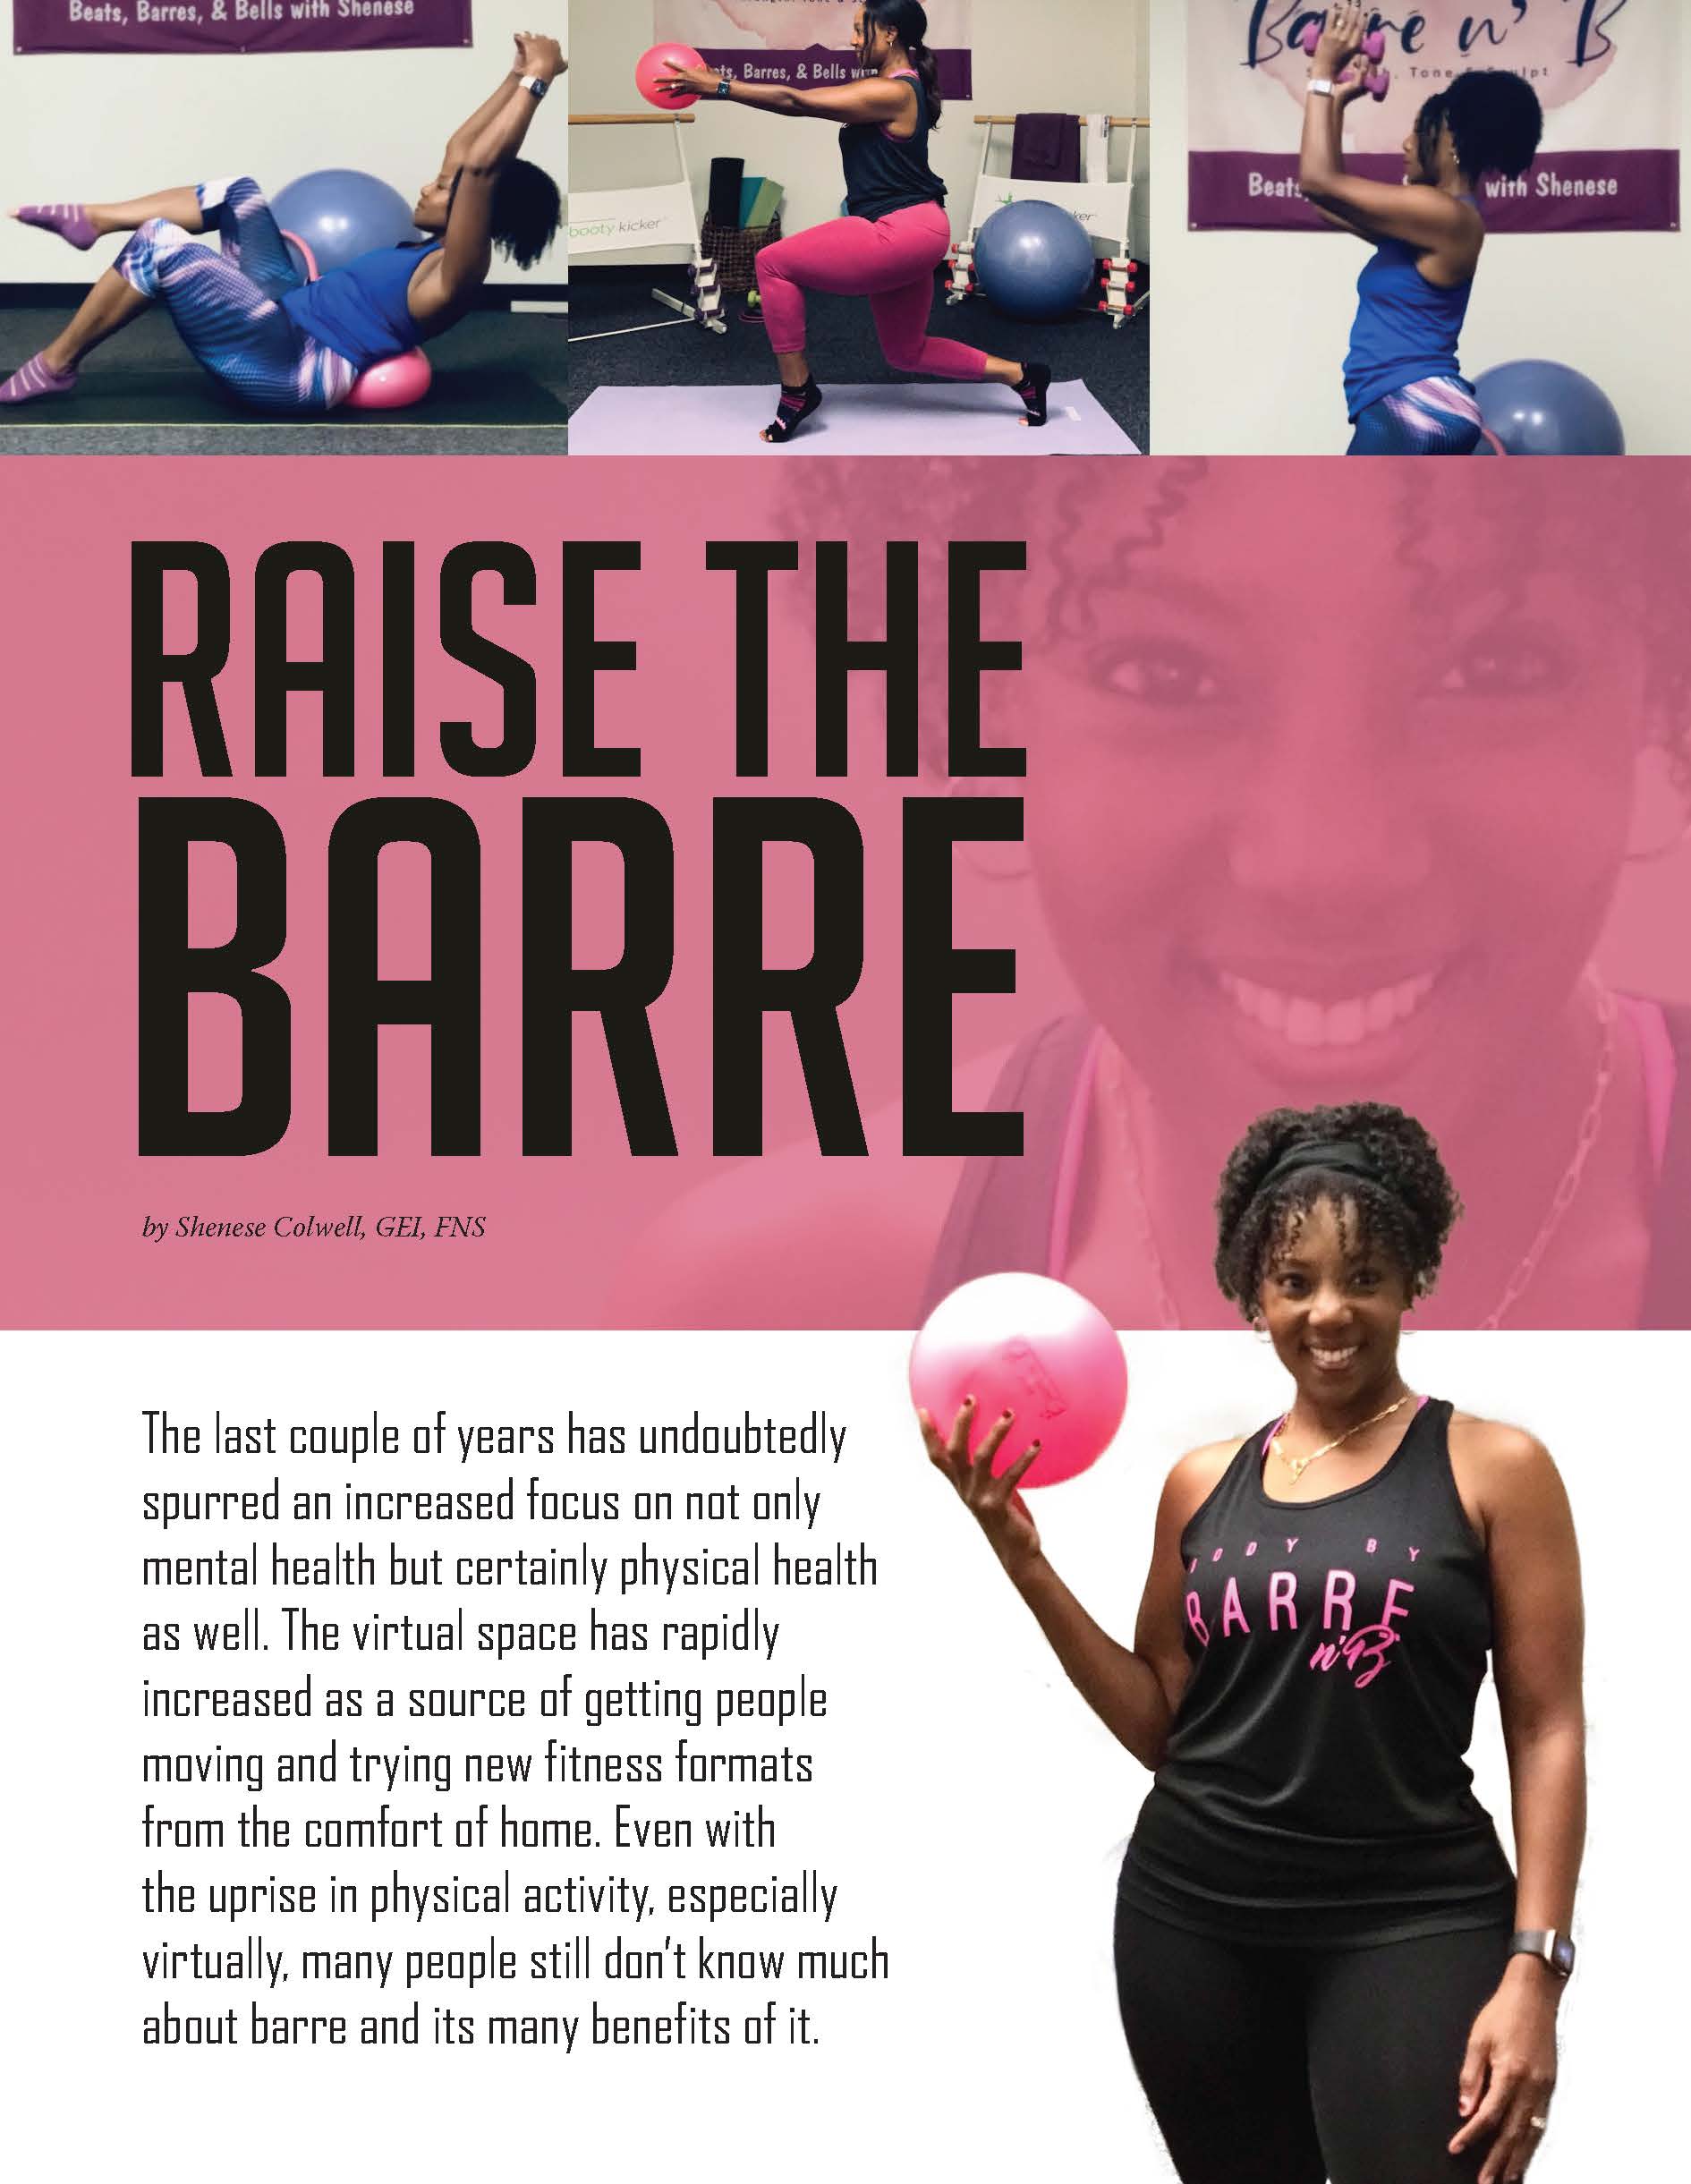 What Is Barre? Experts Explain the Benefits of Barre Workouts